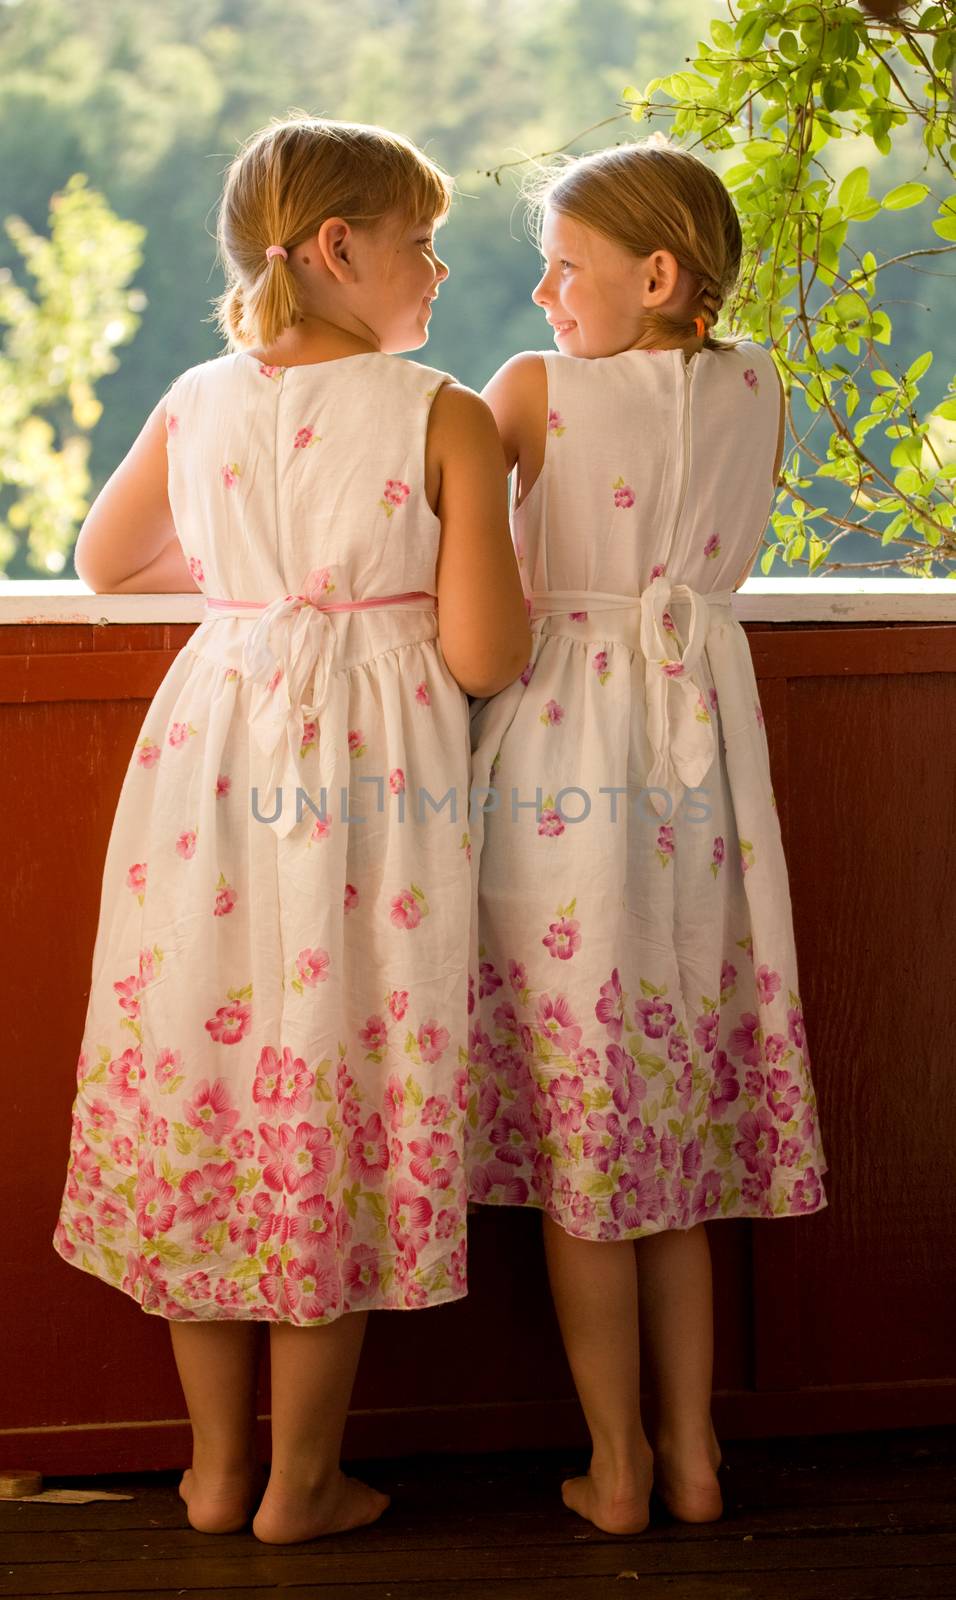 Twin girls in summer dresses on porch smiling to eachother